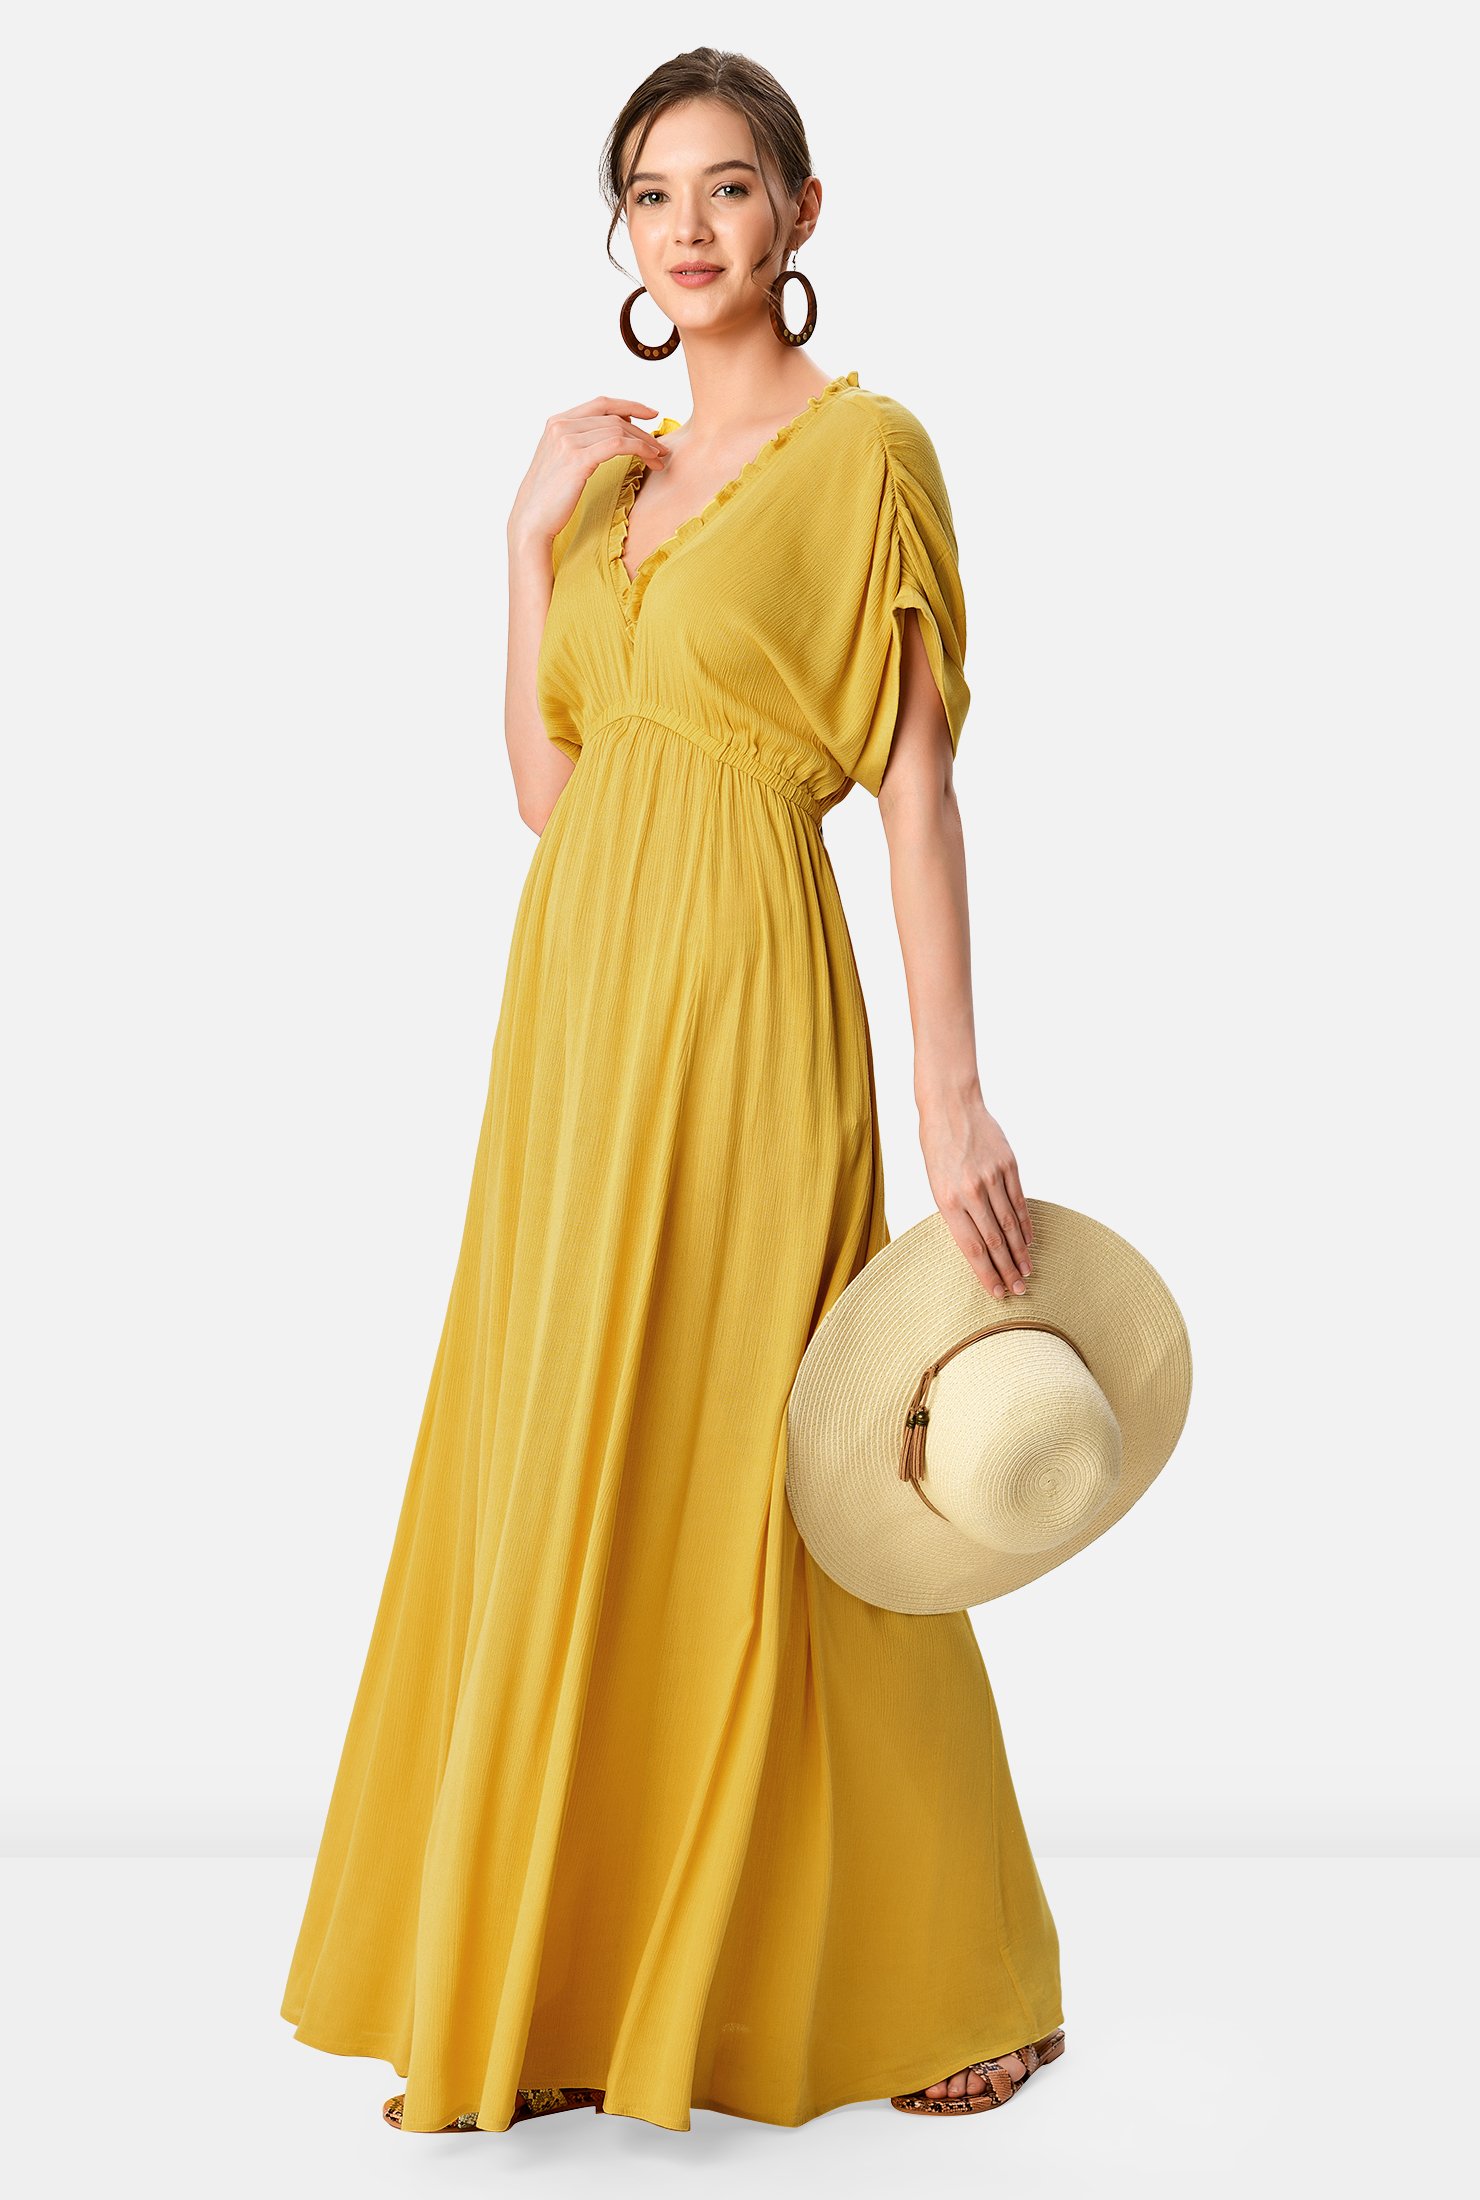 Look forward to warm weather and sunshine in our light crinkle maxi dress trimmed with ruffle frills at the neckline and elasticated at the shoulders and empire waist for soft texture.  